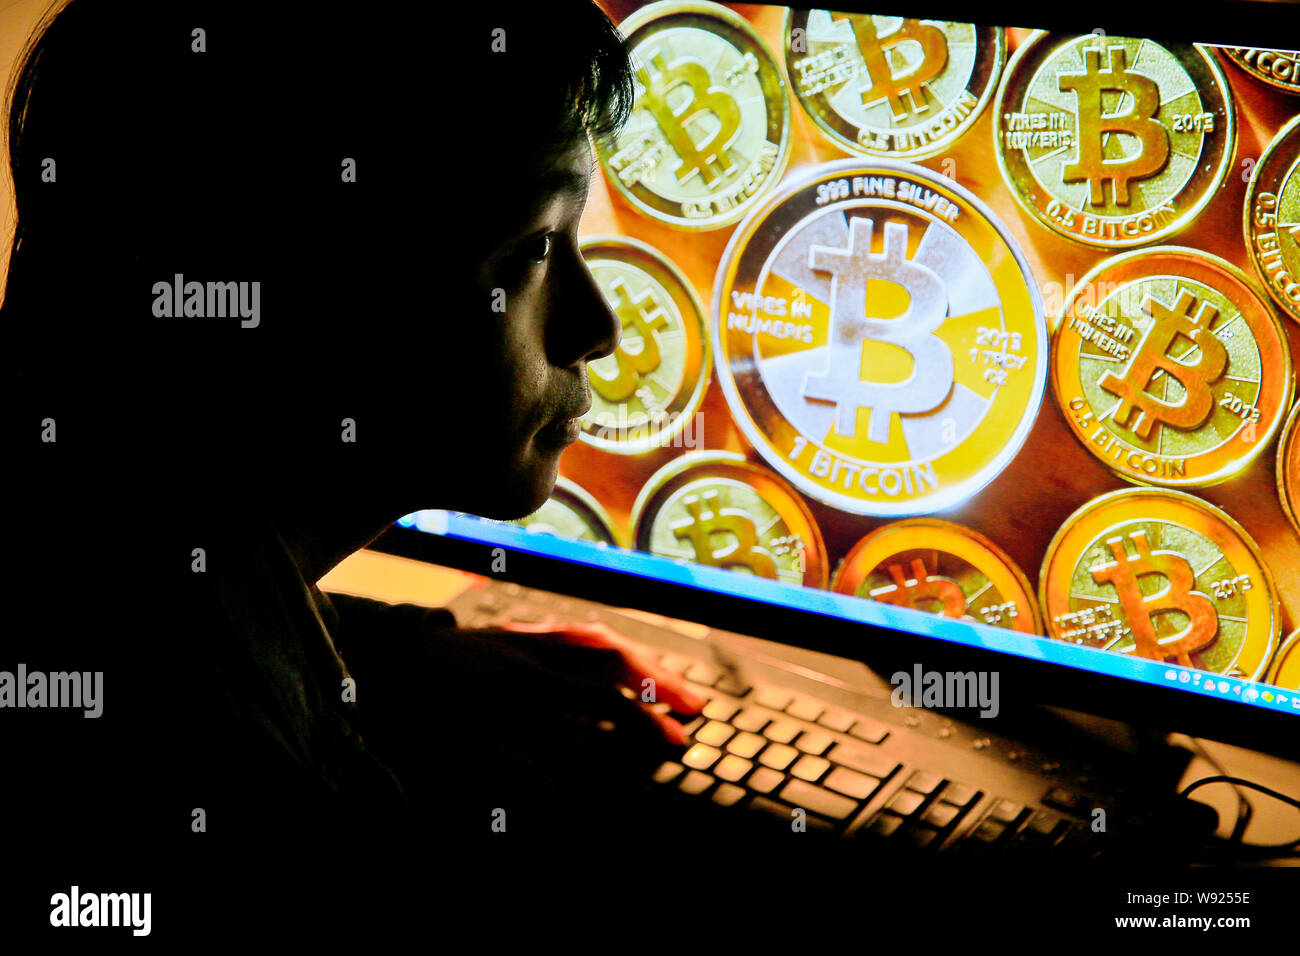 A Chinese netizen browses a photo of Bitcoins on his desktop computer in Guangzhou city, south Chinas Guangdong province, 9 December 2013.   Some vend Stock Photo